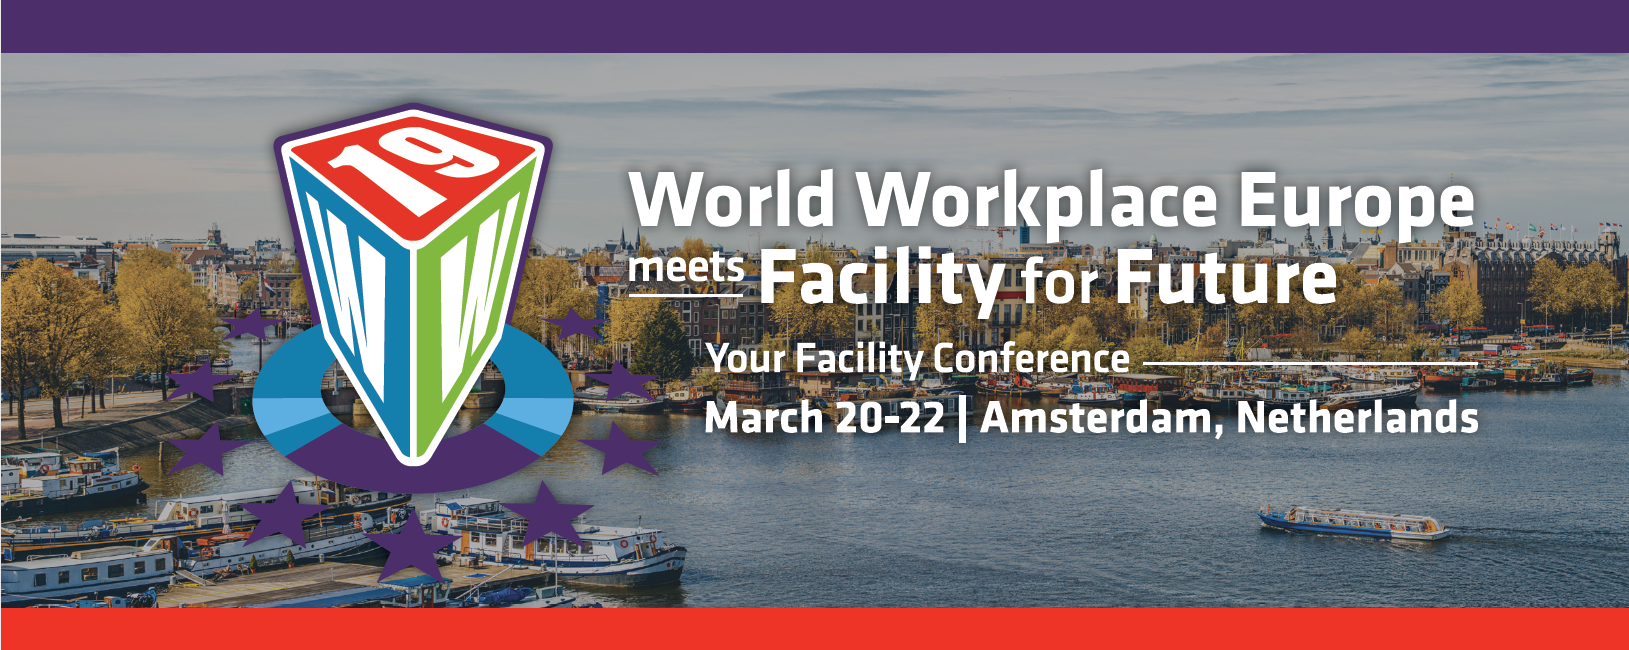 World Workplace Europe Meets Facility For Future